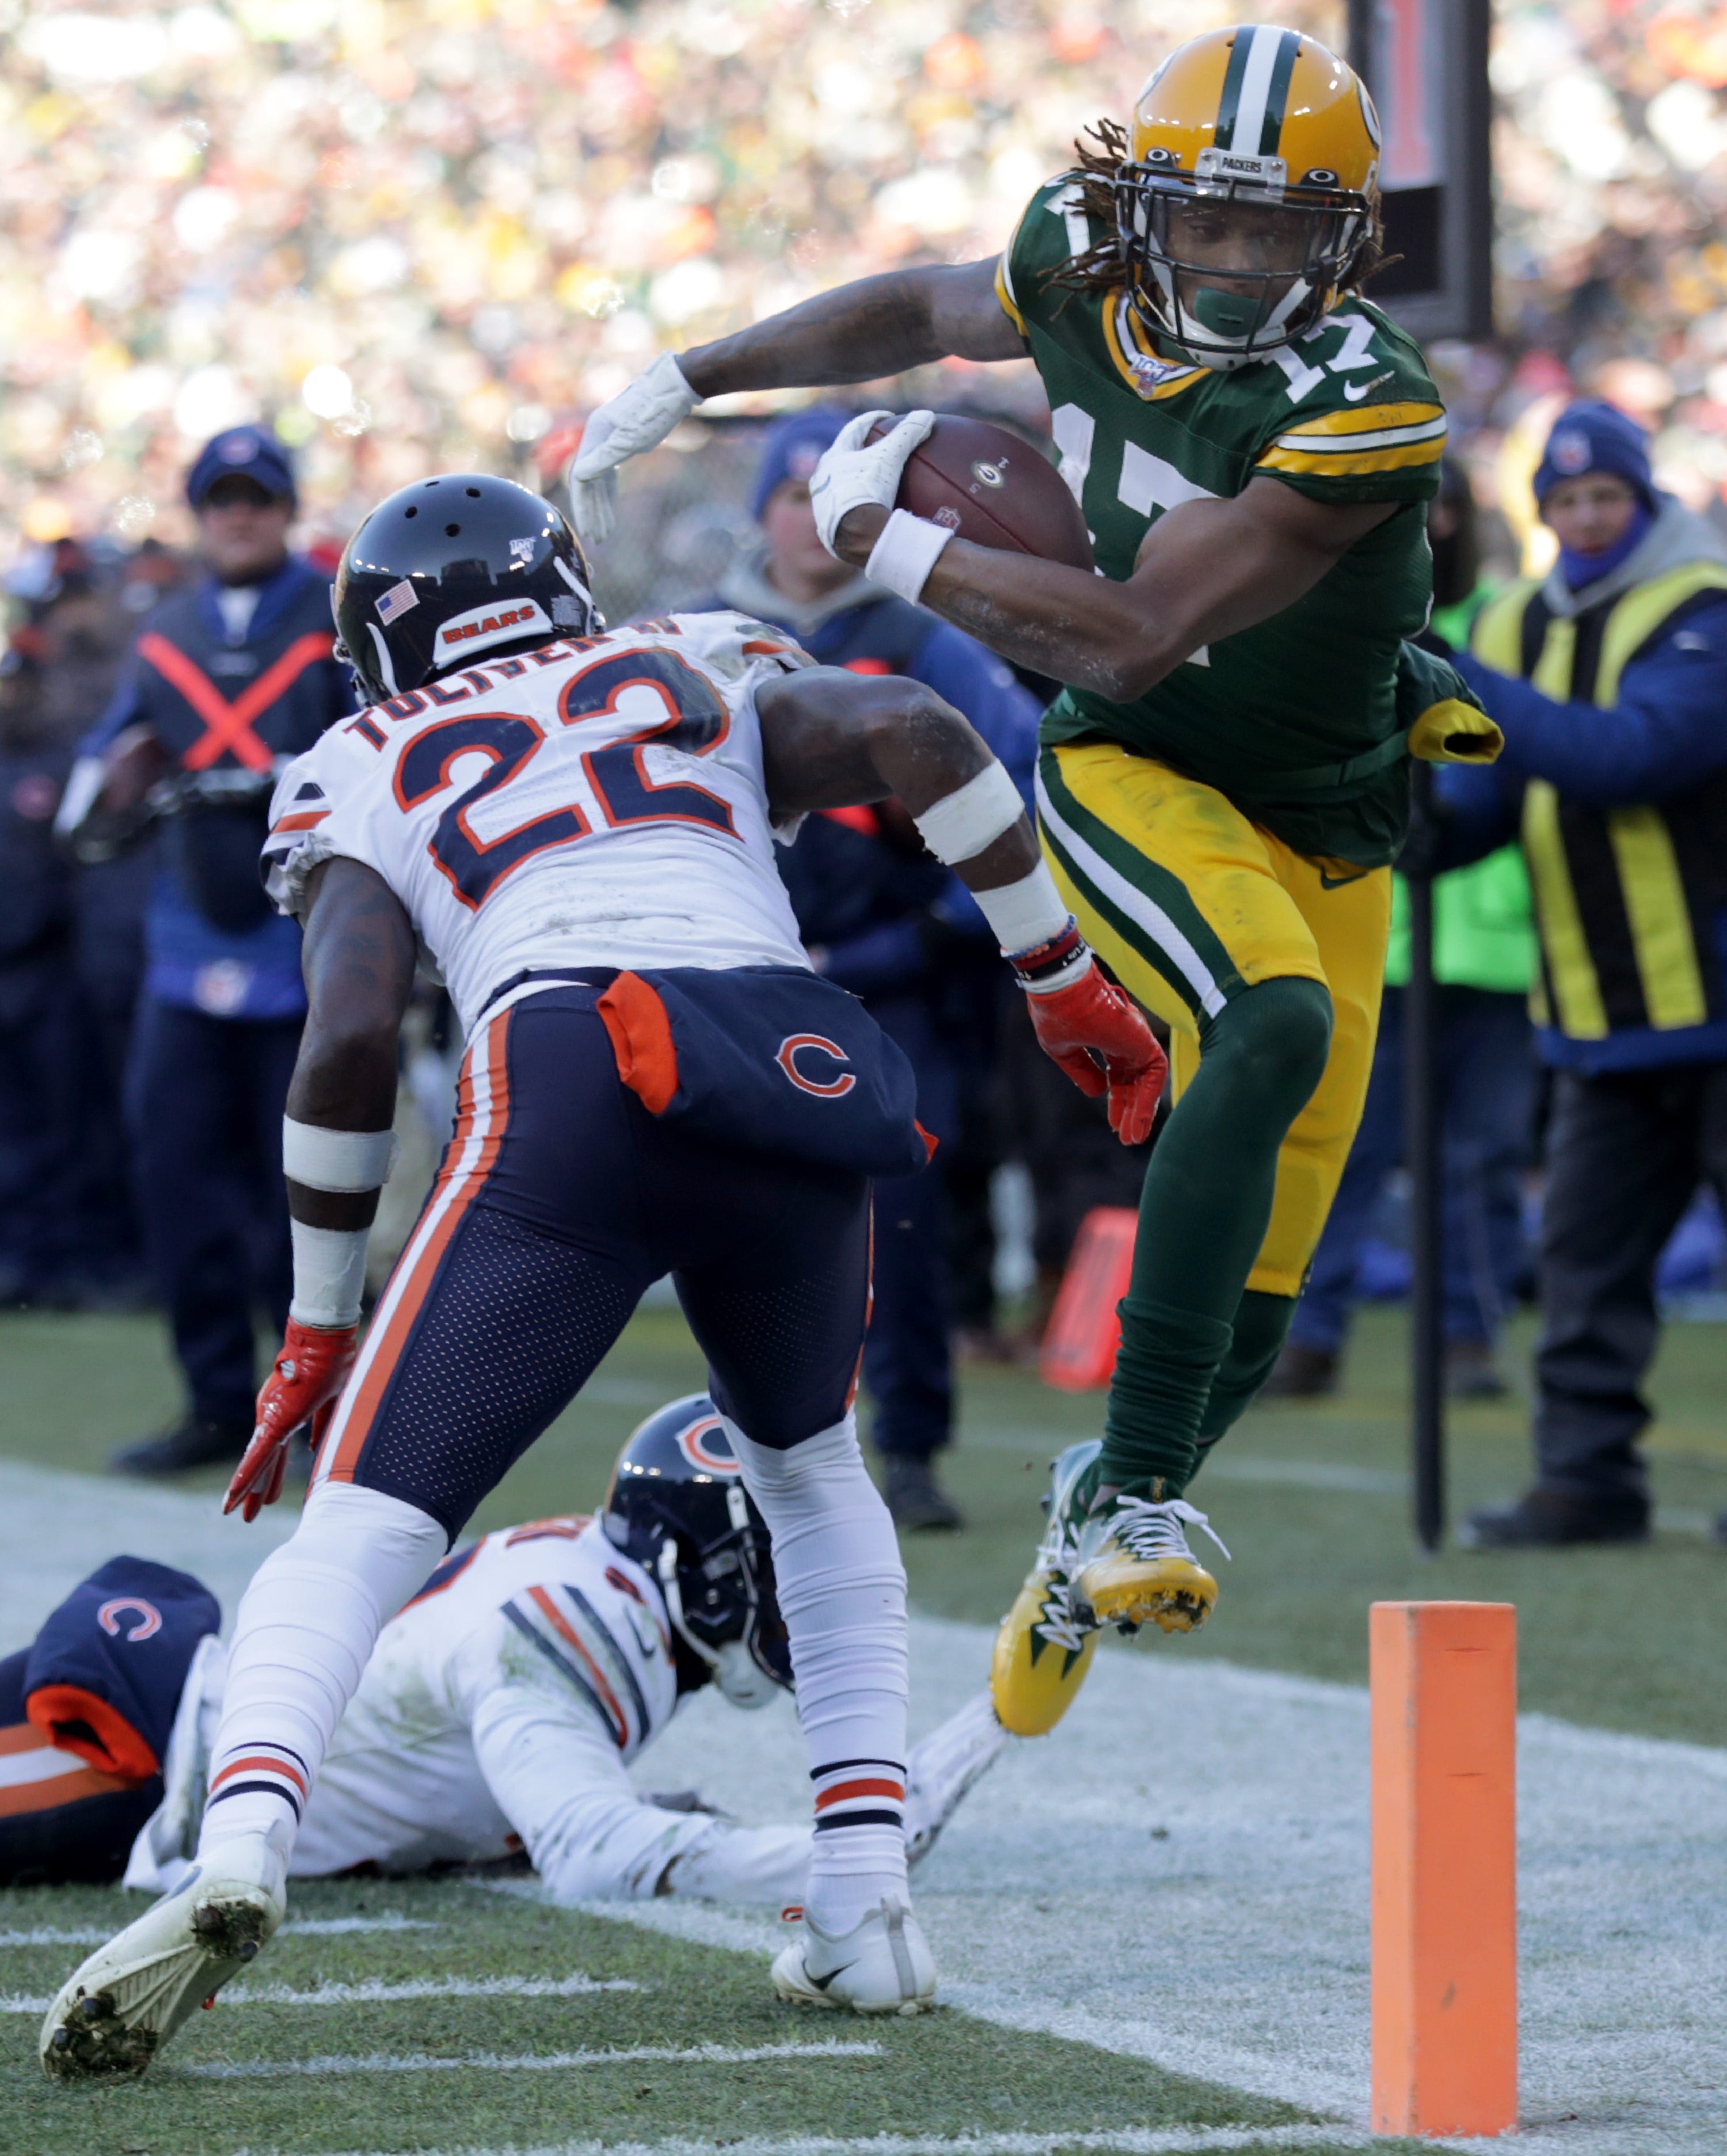 Chicago Bears defensive back Kevin Toliver (22) pushes Green Bay Packers wide receiver Davante Adams (17) out of bounds at the goal line during football game on Sunday, December 15, 2019, at Lambeau Field in Green Bay, Wis.